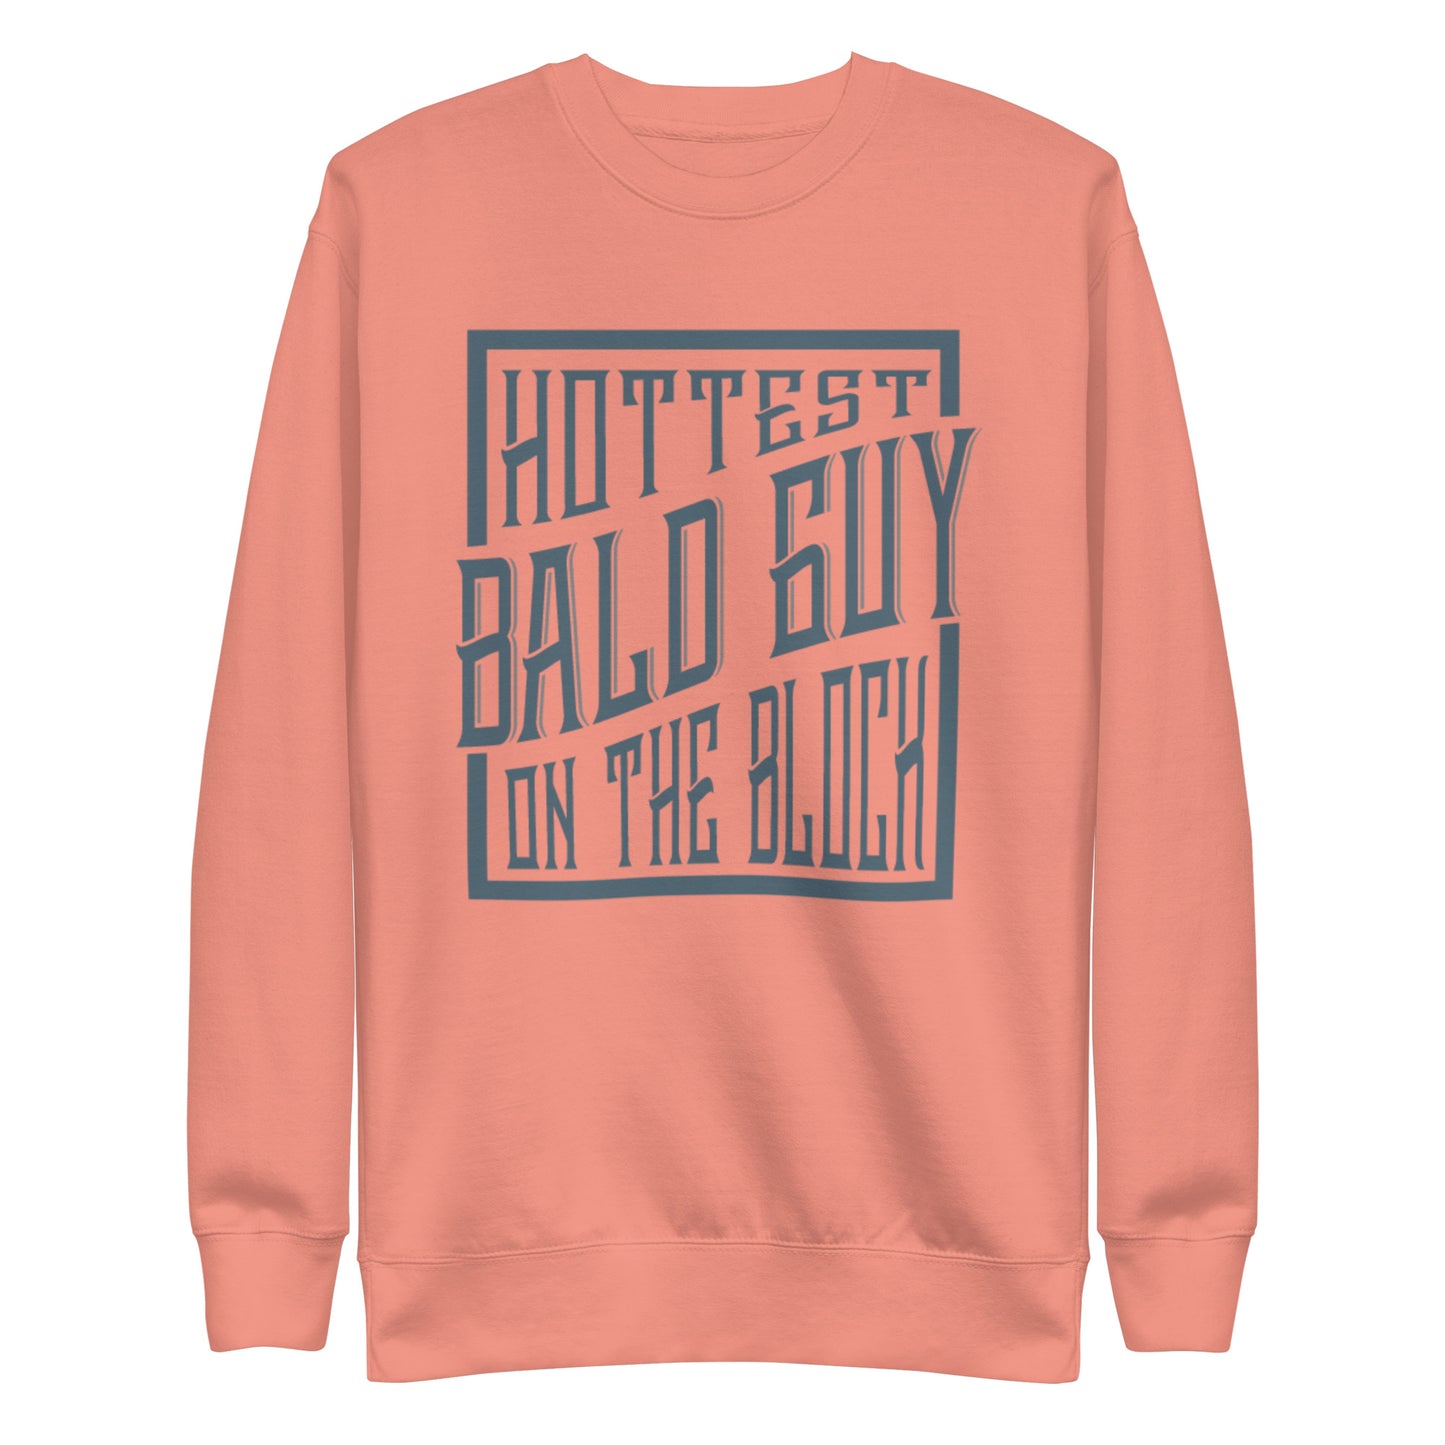 Stay warm with our best-selling Hottest Bald Guy sweatshirt - the ultimate combination of comfort and fashion!